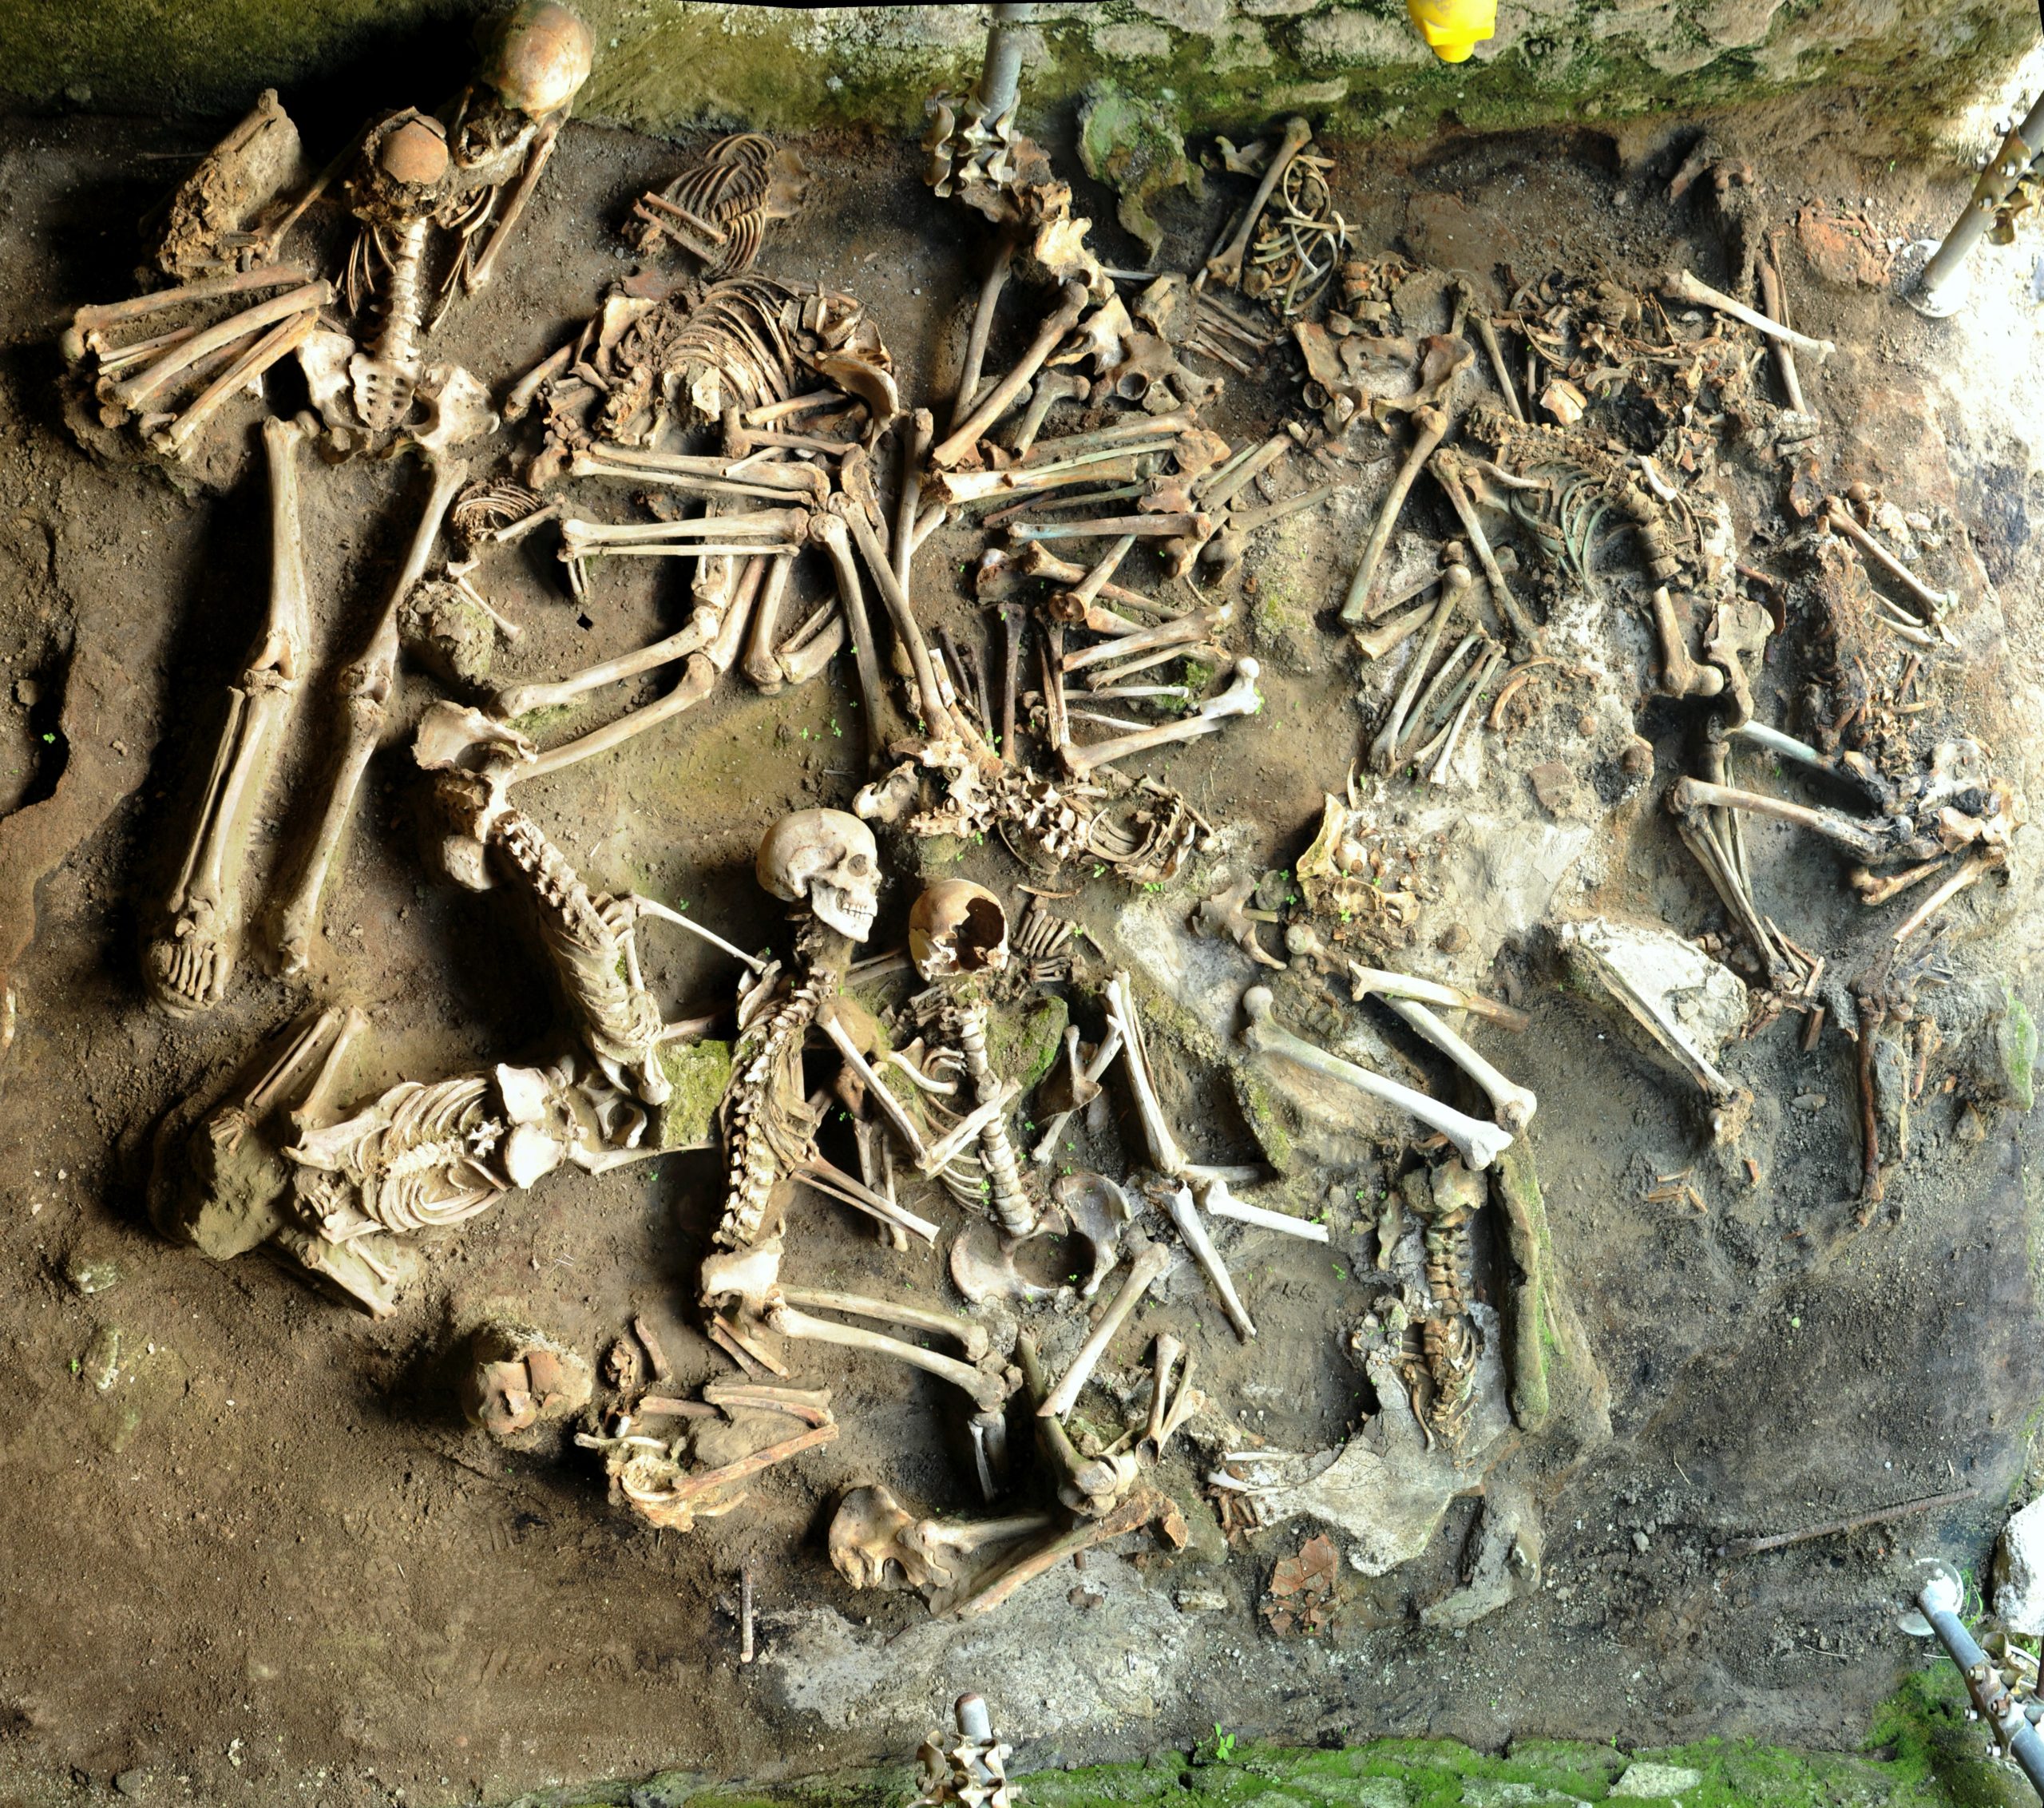 2,000-Year-Old Bones of Mt. Vesuvius Victims Reveal What They Ate